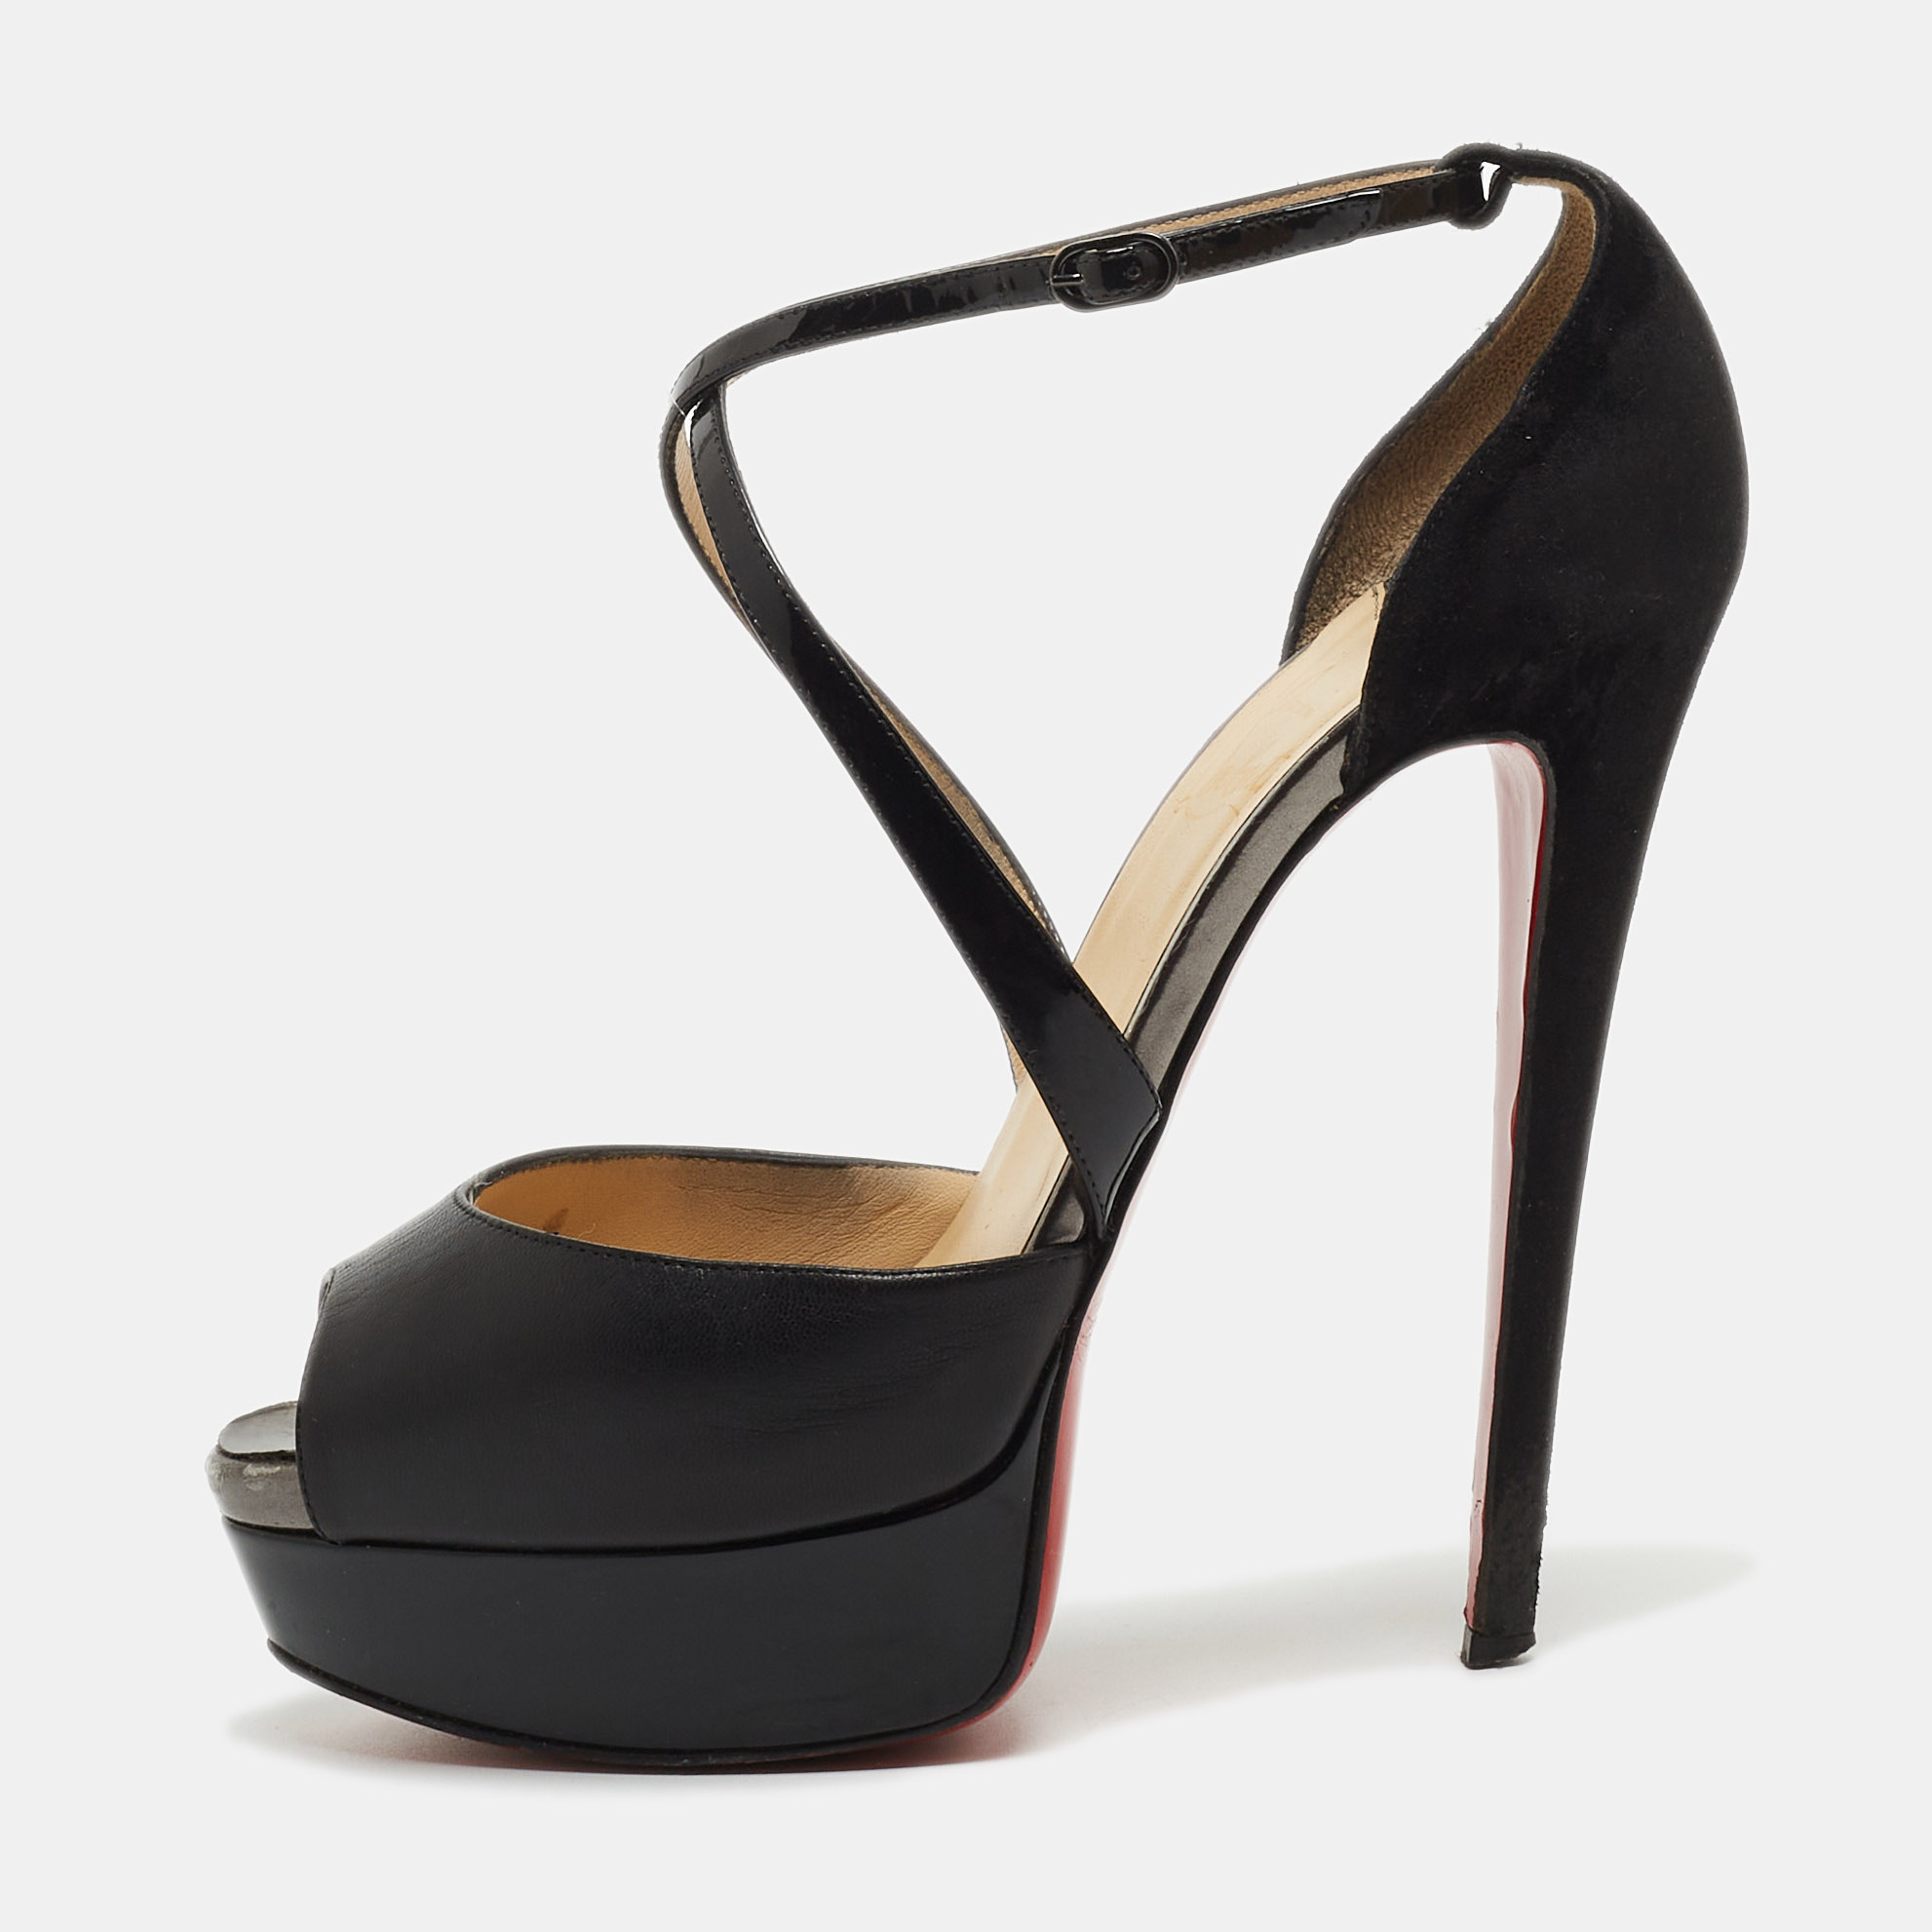 Pre-owned Christian Louboutin Black Leather Exagona Platform Ankle Strap Sandals Size 37